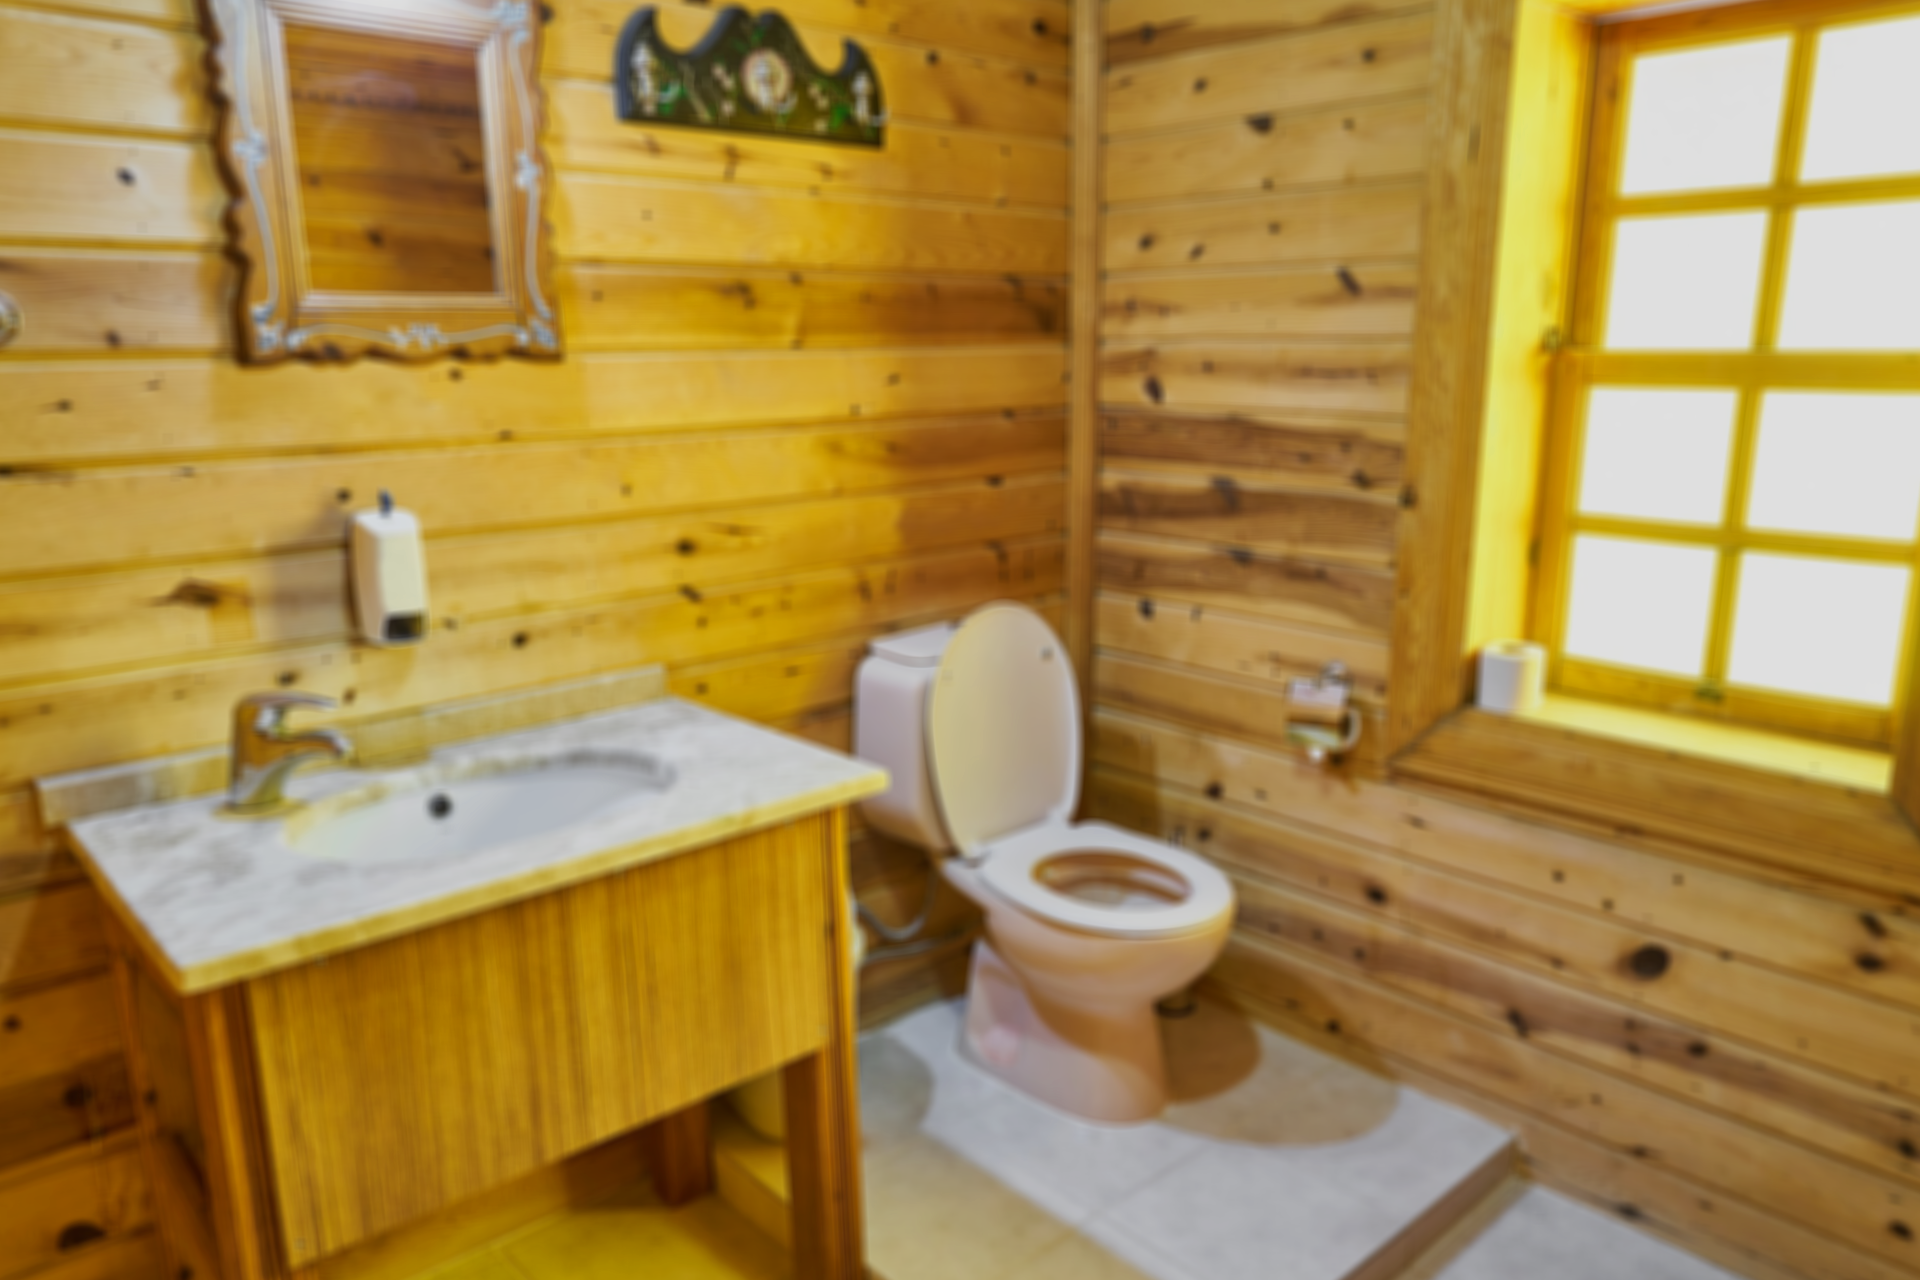 Best Compact Toilets for Small Bathrooms